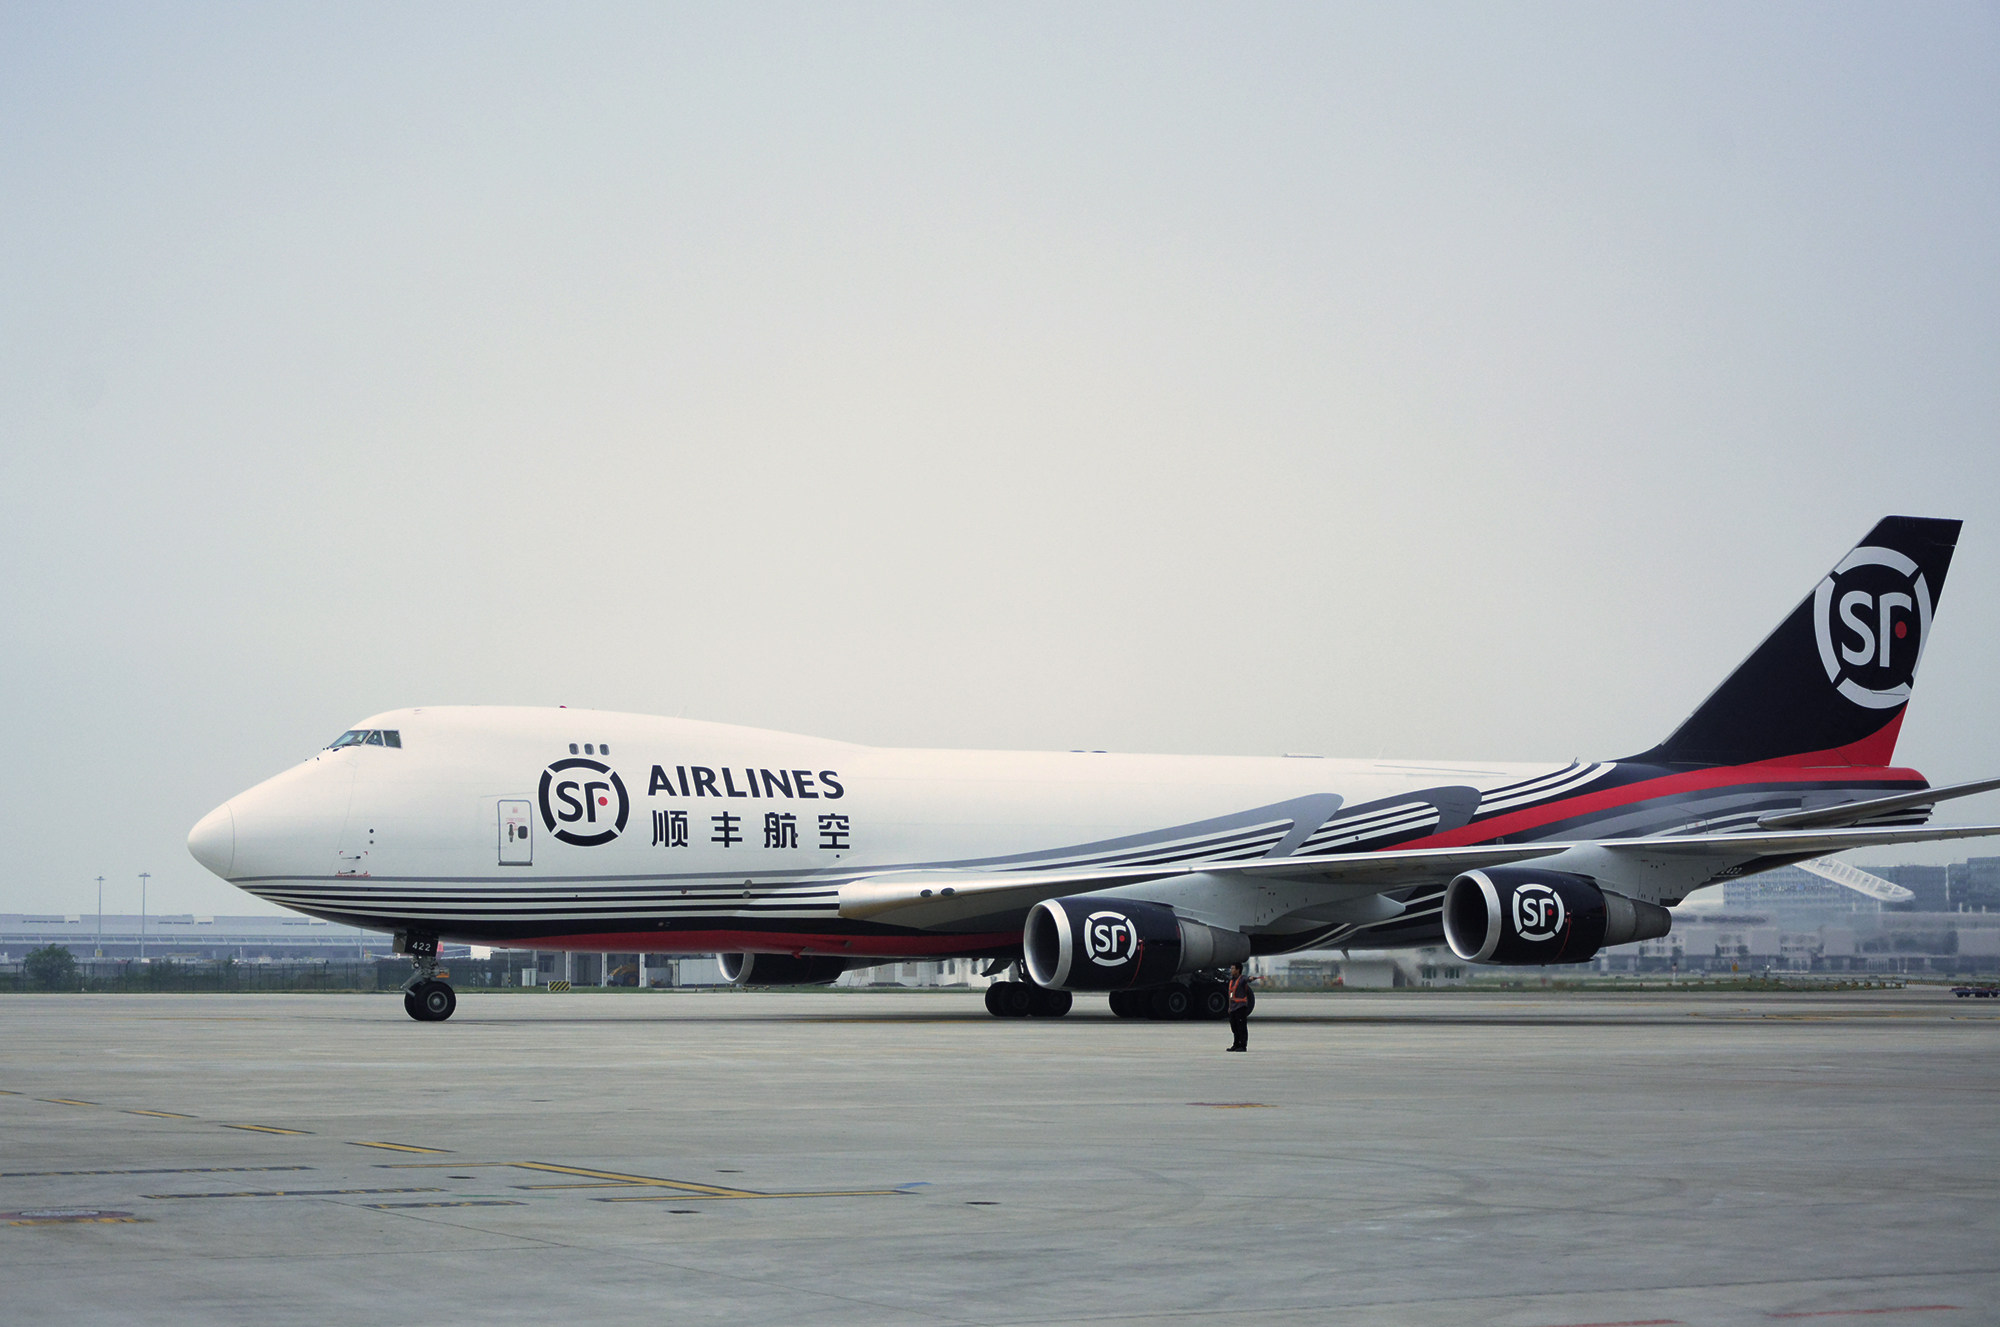 An undated photograph of a Boeing 747-400ERF freight aircraft with SF Airlines’ livery at the Bao’an airport in Shenzhen. Photo: SF Airlines